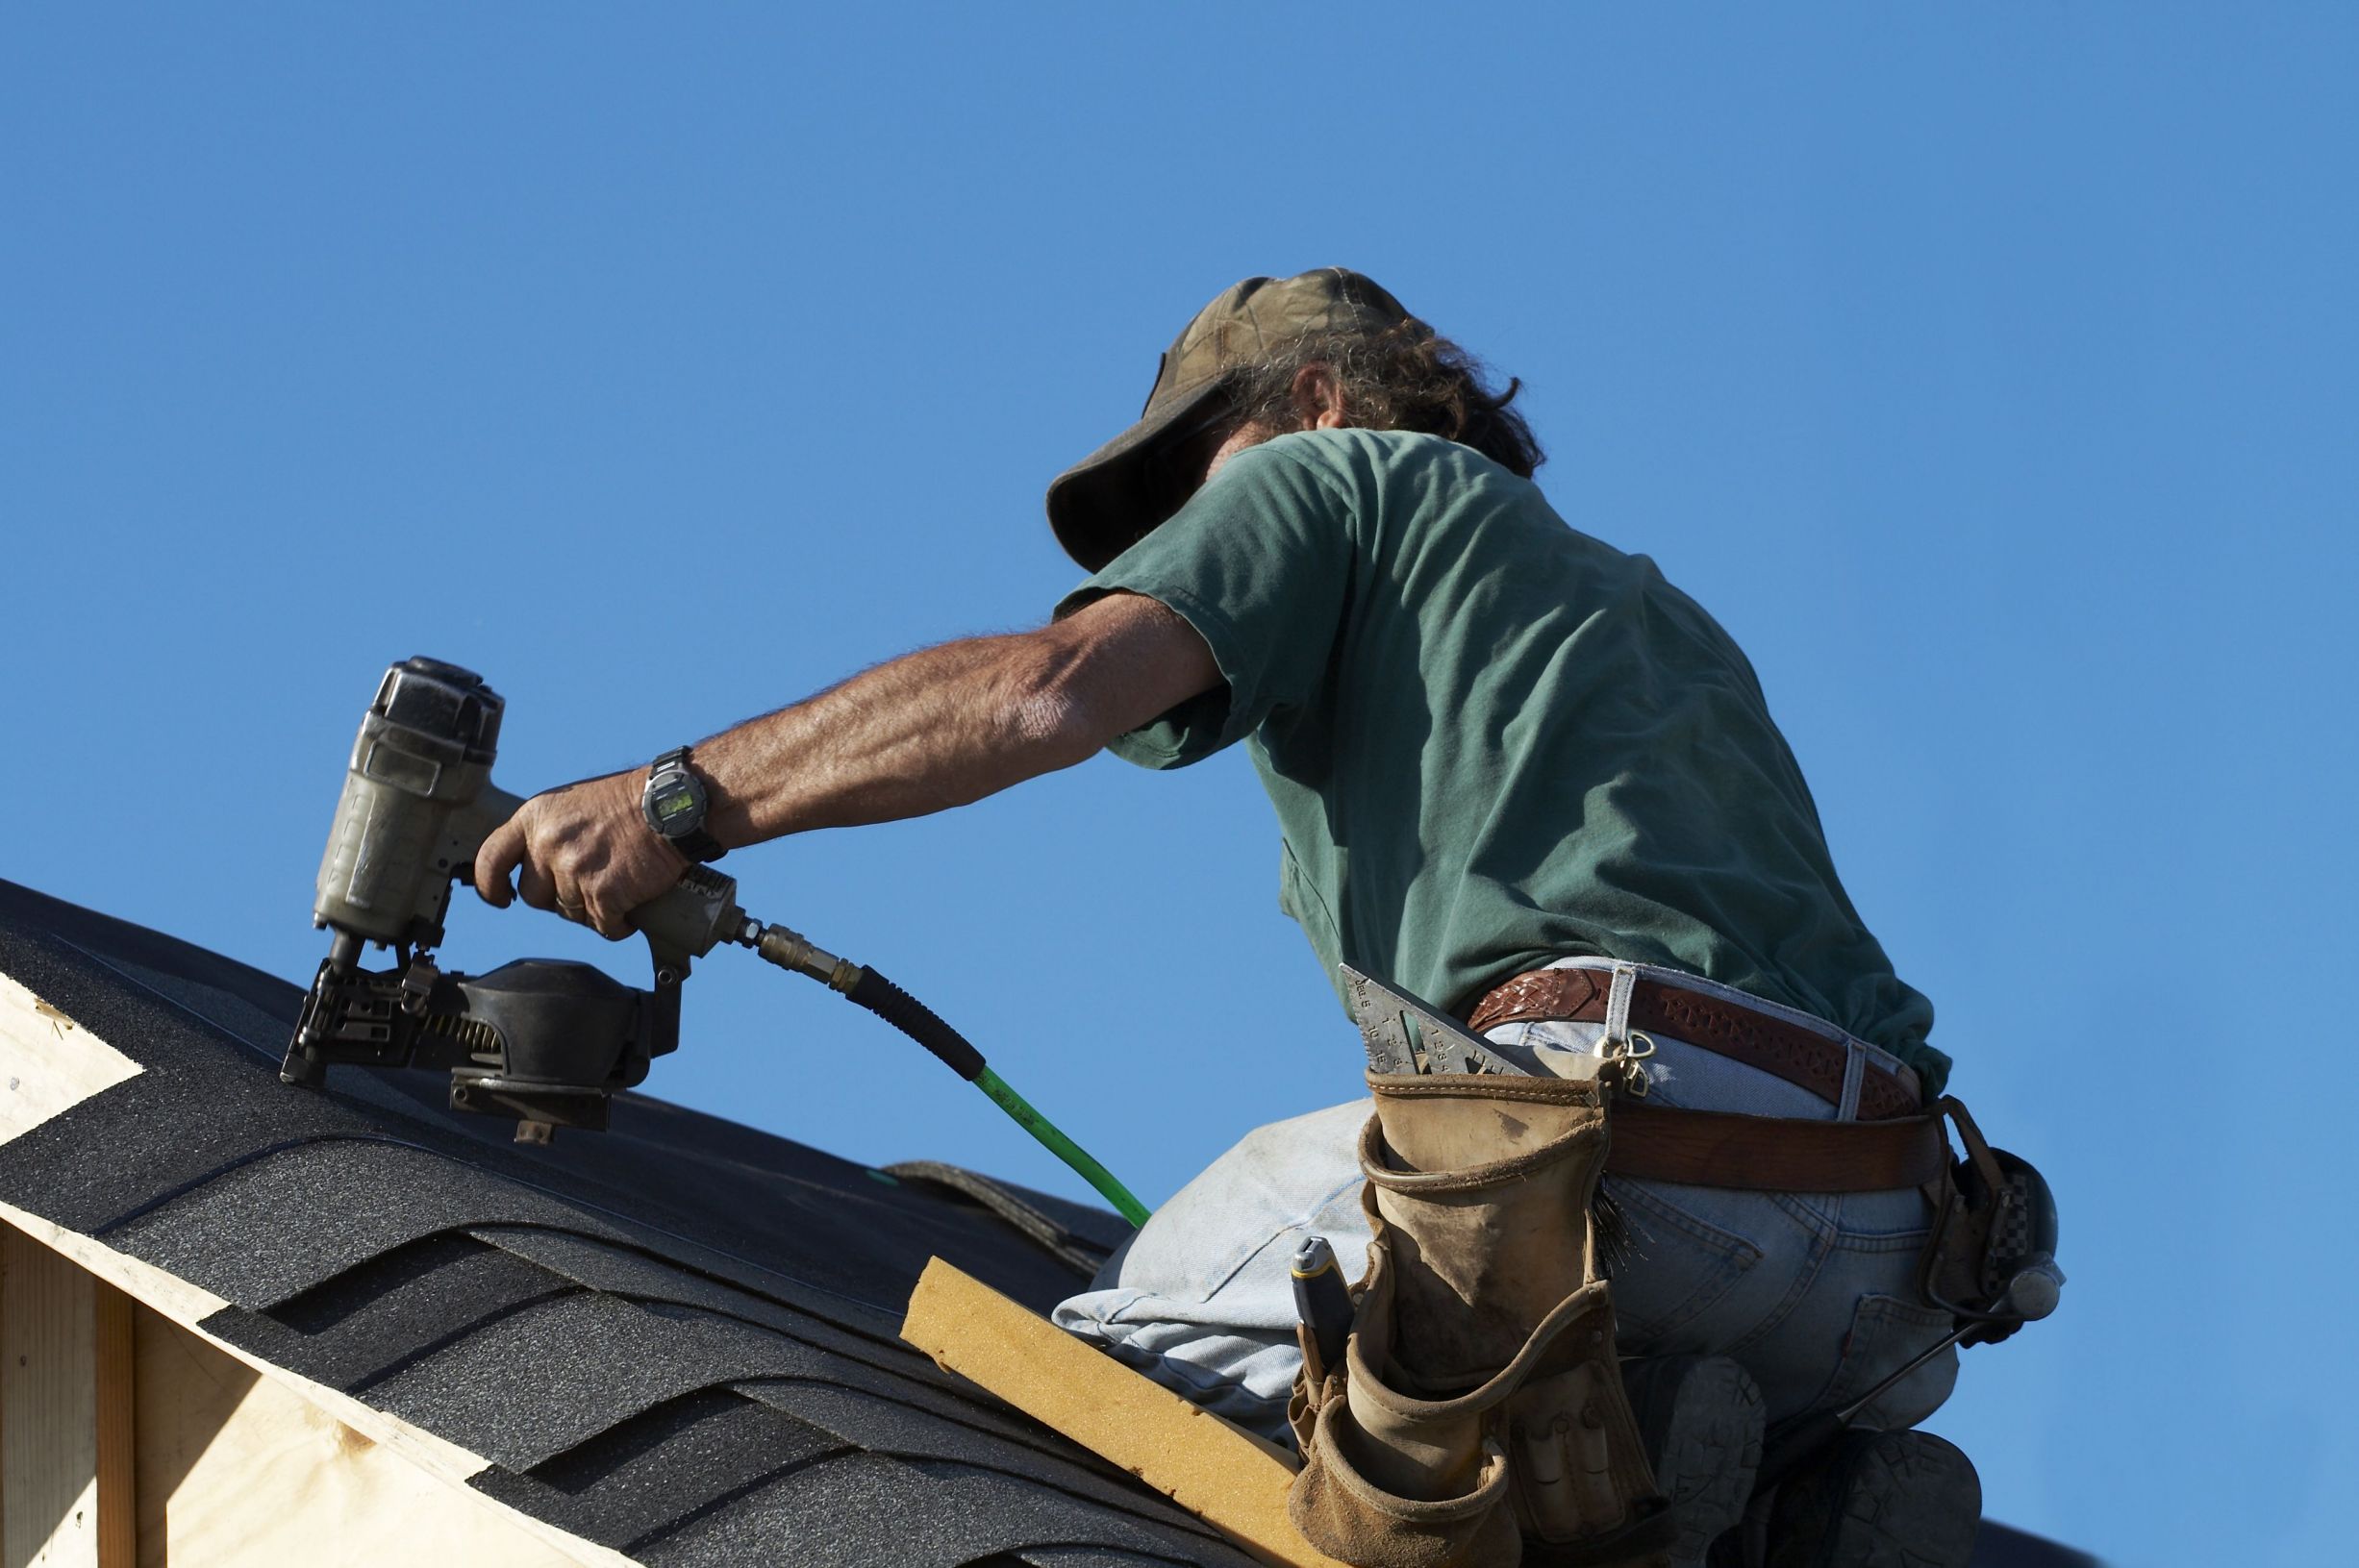 Getting Tile Roofing Services from a Professional